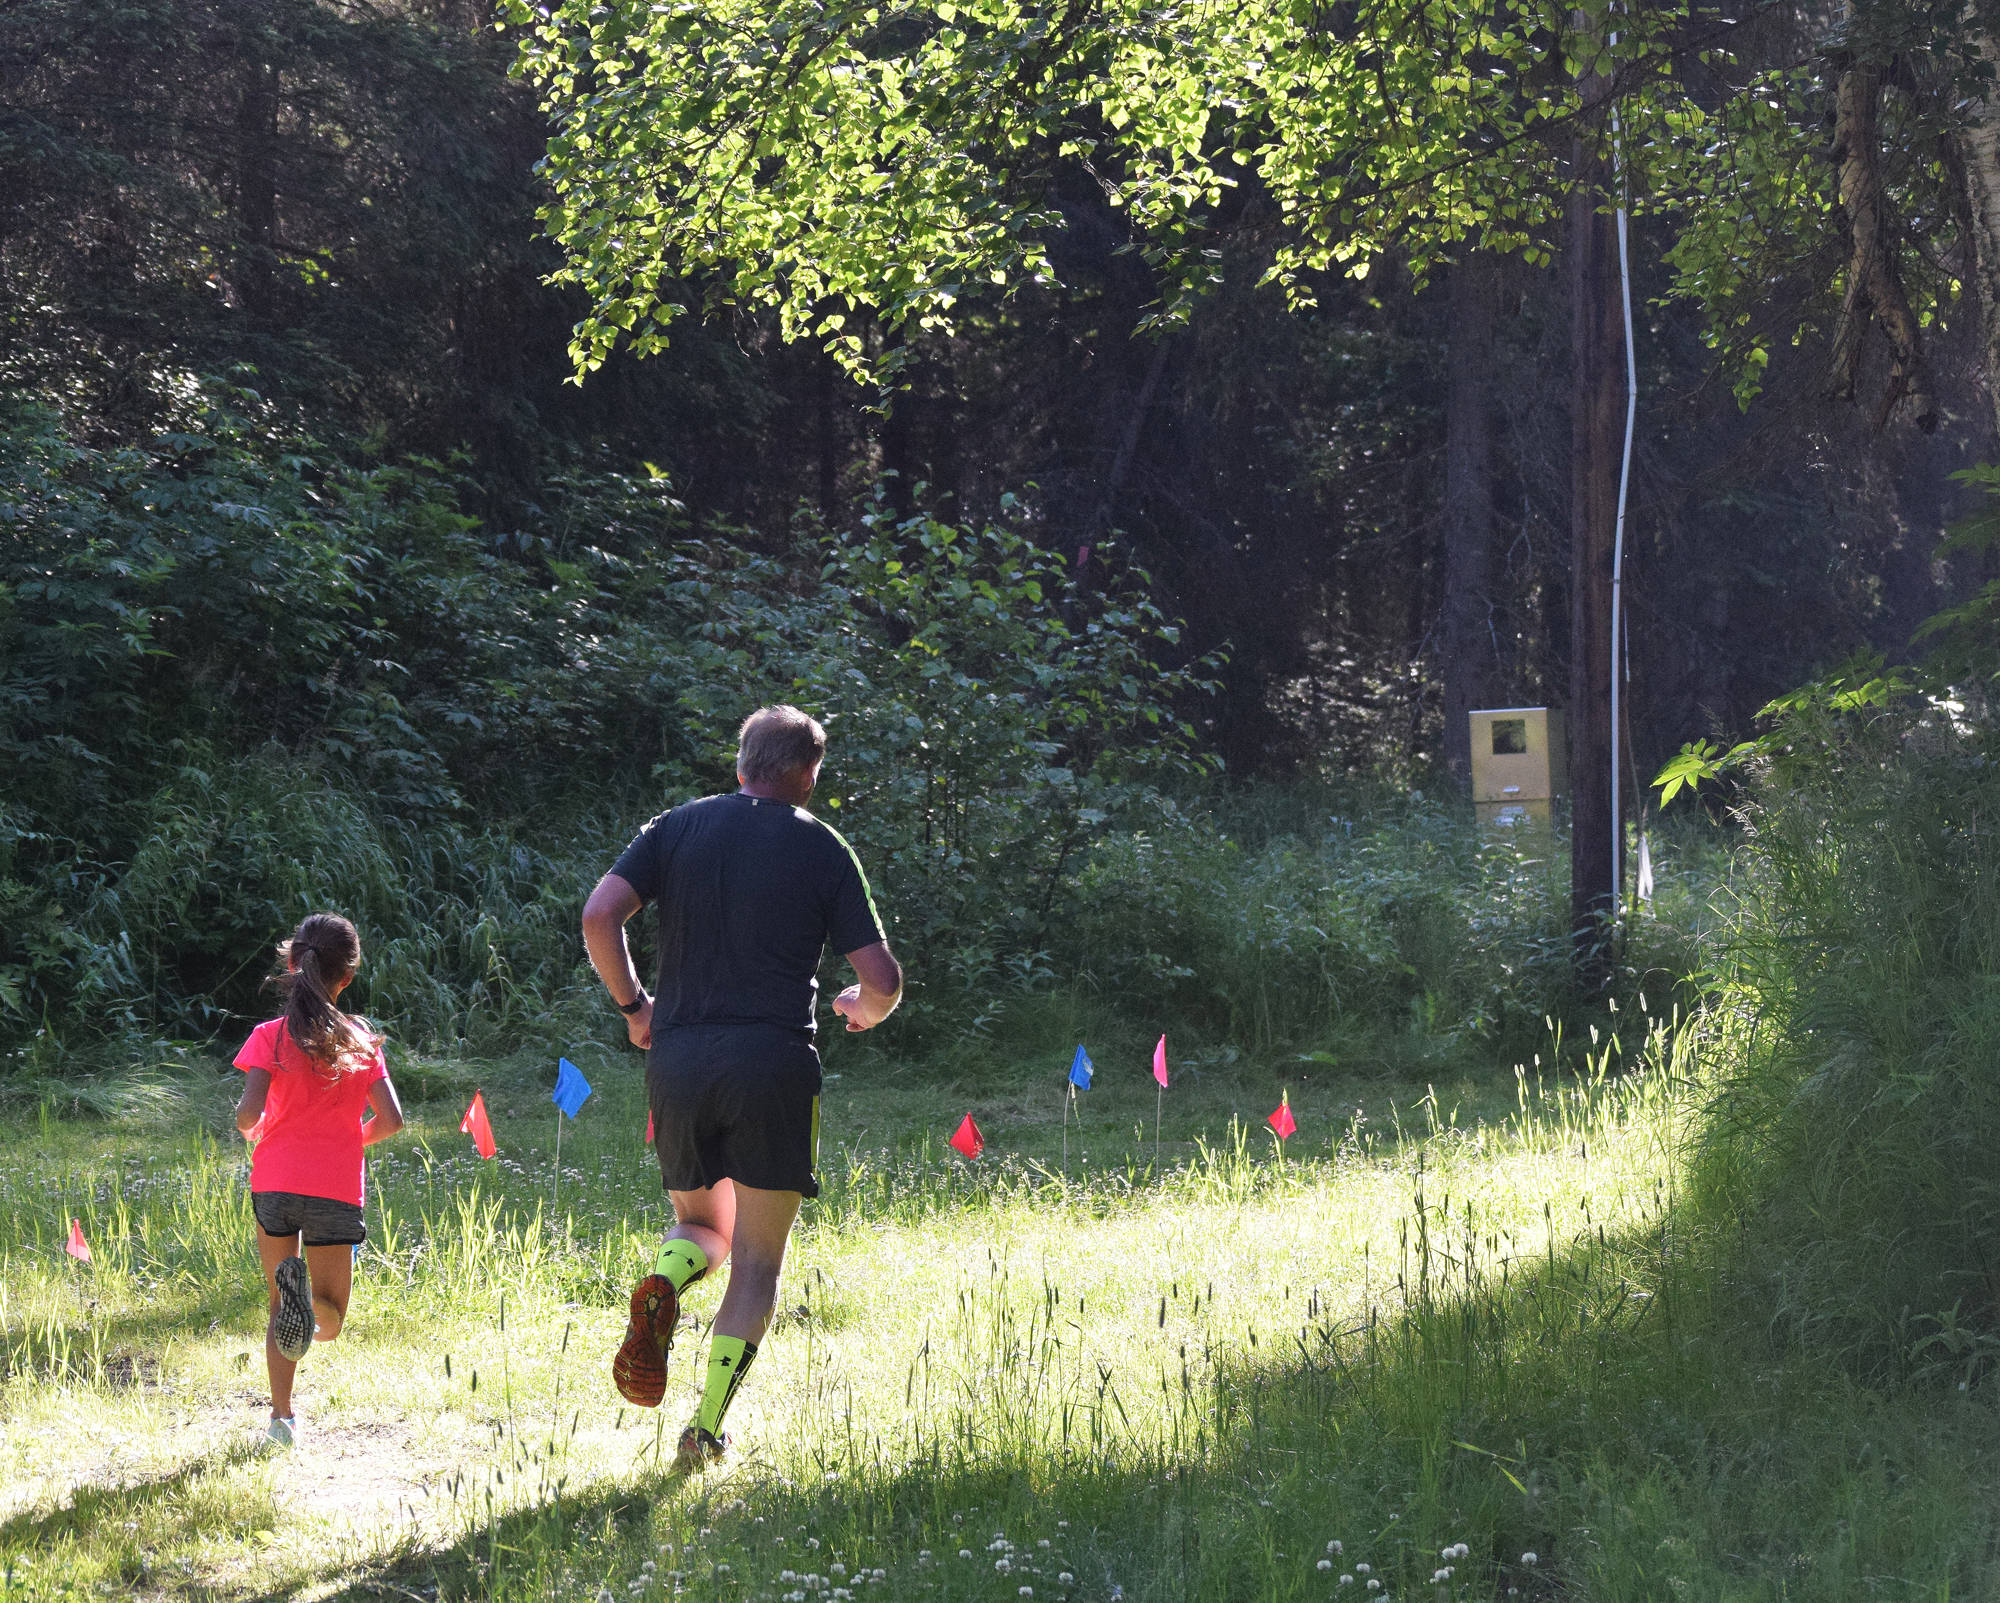 A pair of runners race through the woods Saturday morning in the 10-kilometer race at the Soldotna Rotary Run at the Tsalteshi Trails. (Photo by Joey Klecka/Peninsula Clarion)